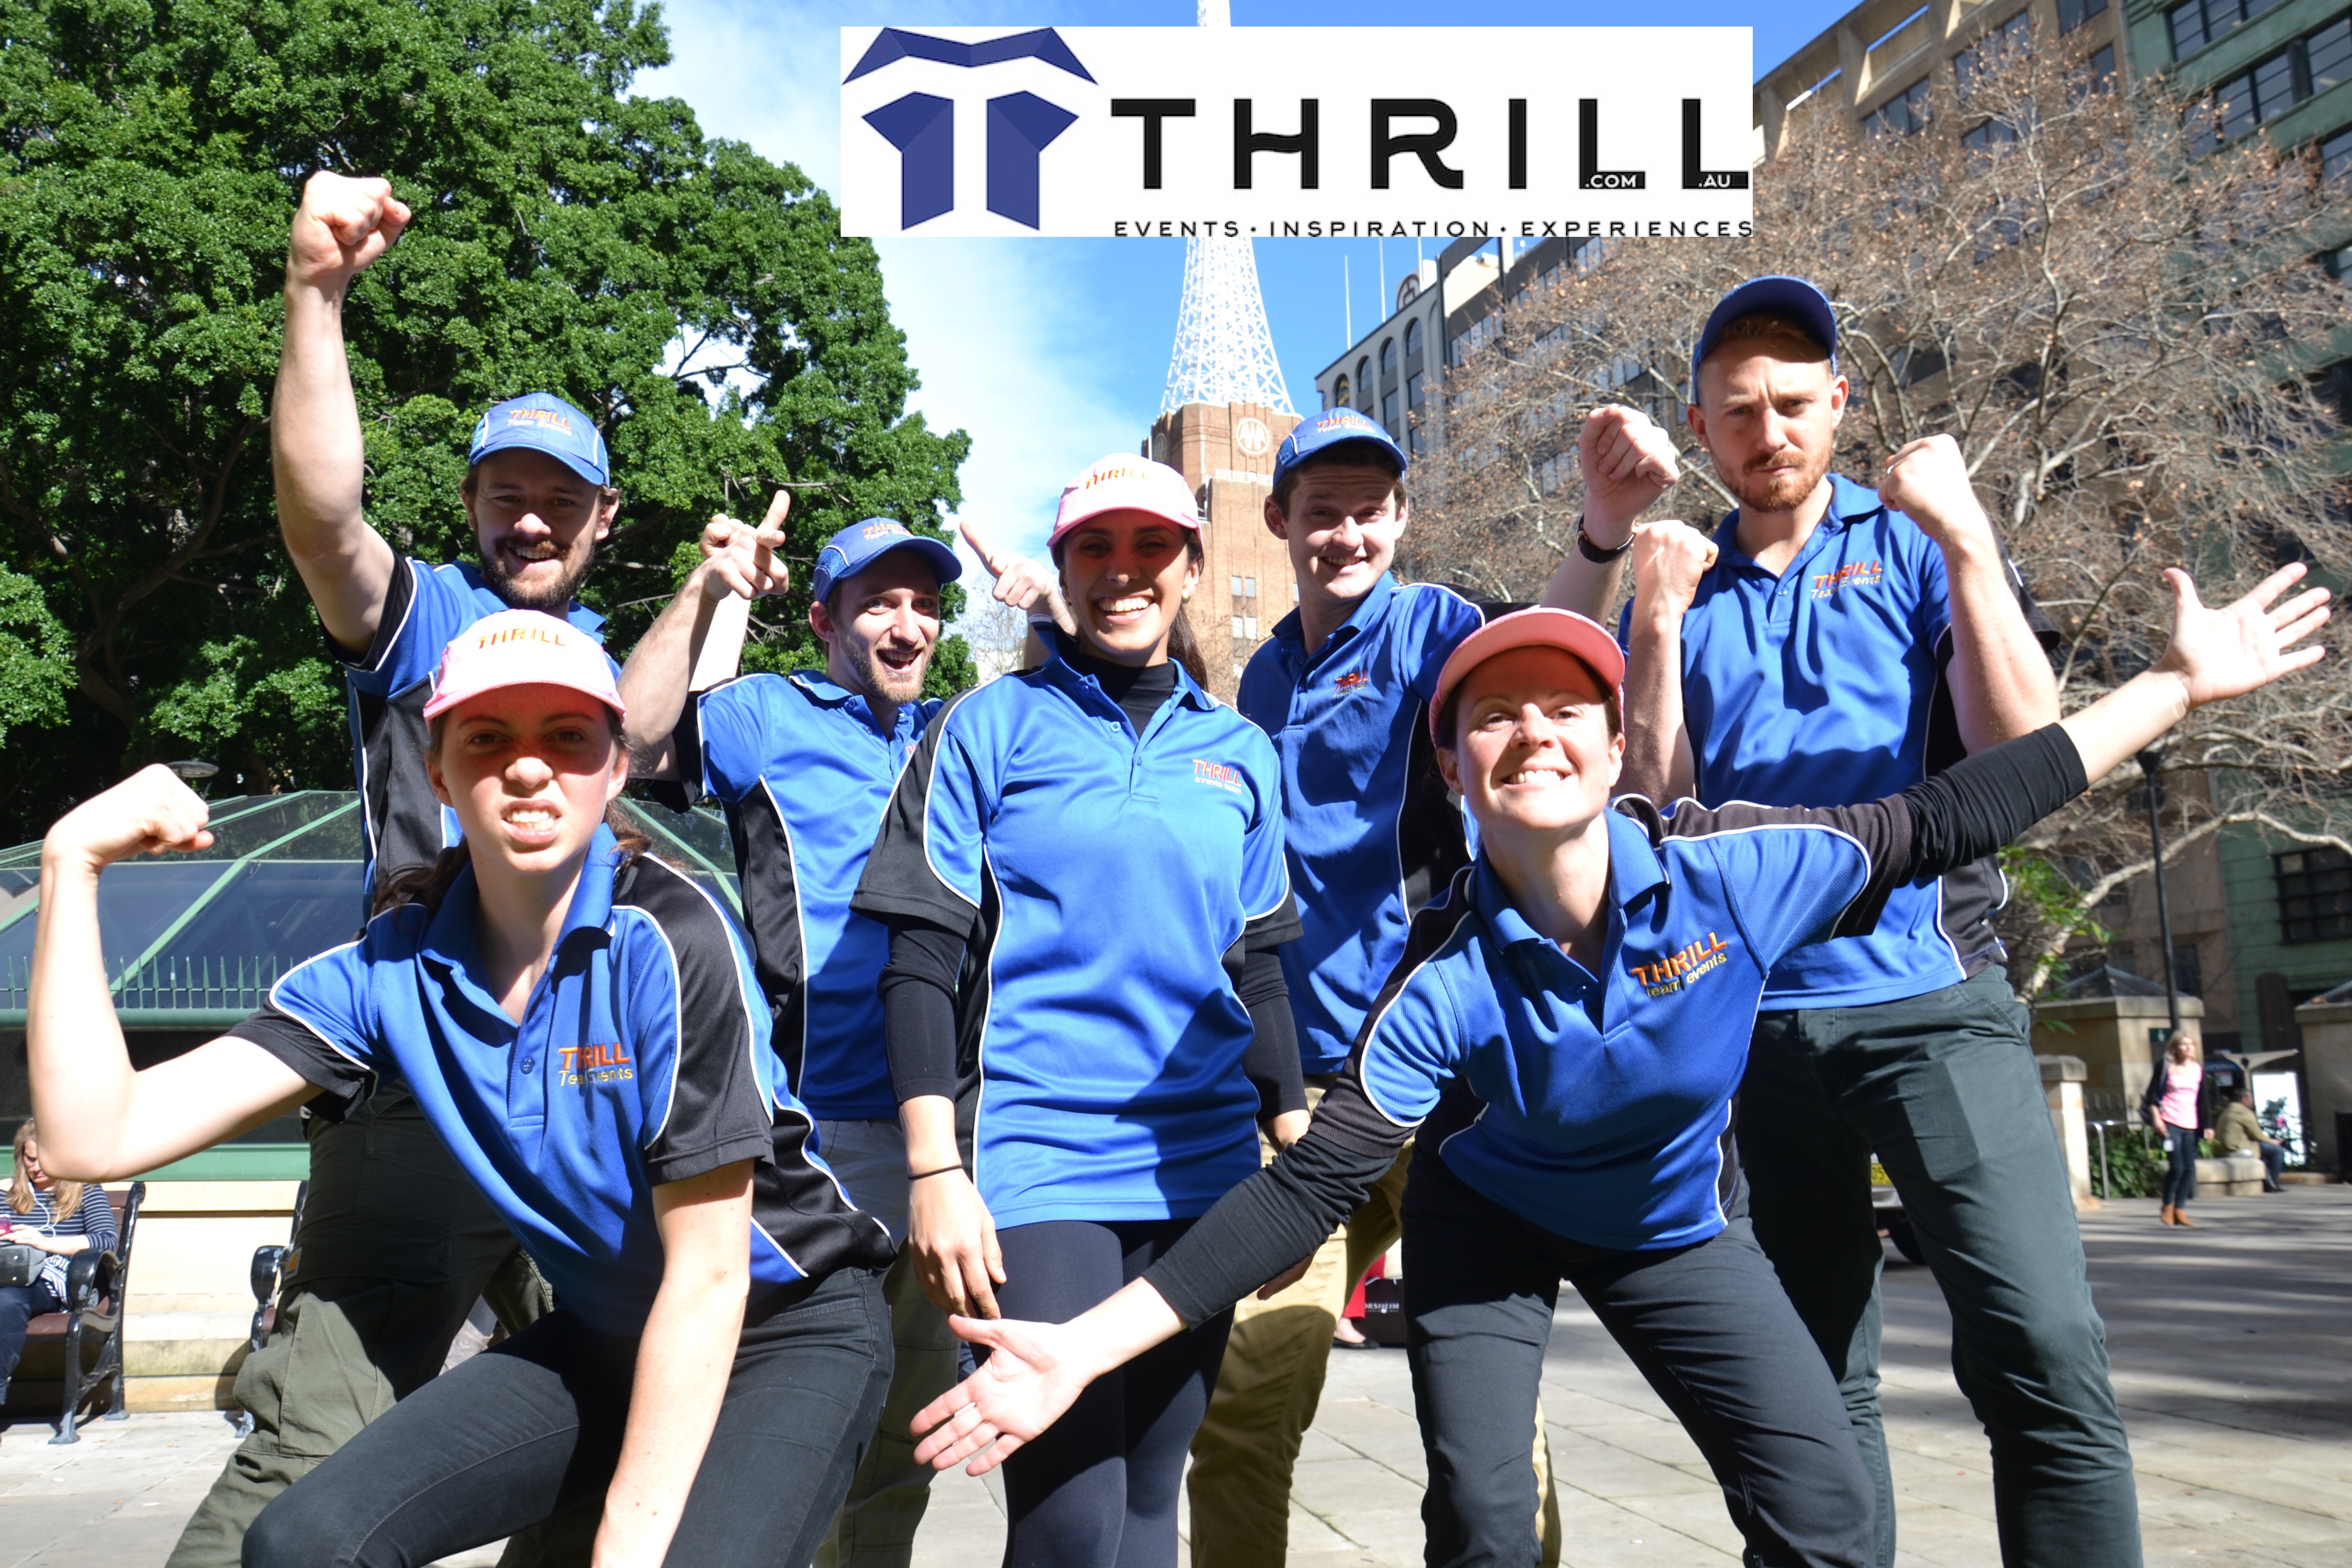 Thrill team builders professional Events coordinators and team building activities staff flex their muscles. In Sydney's corporate training and conference events job market.